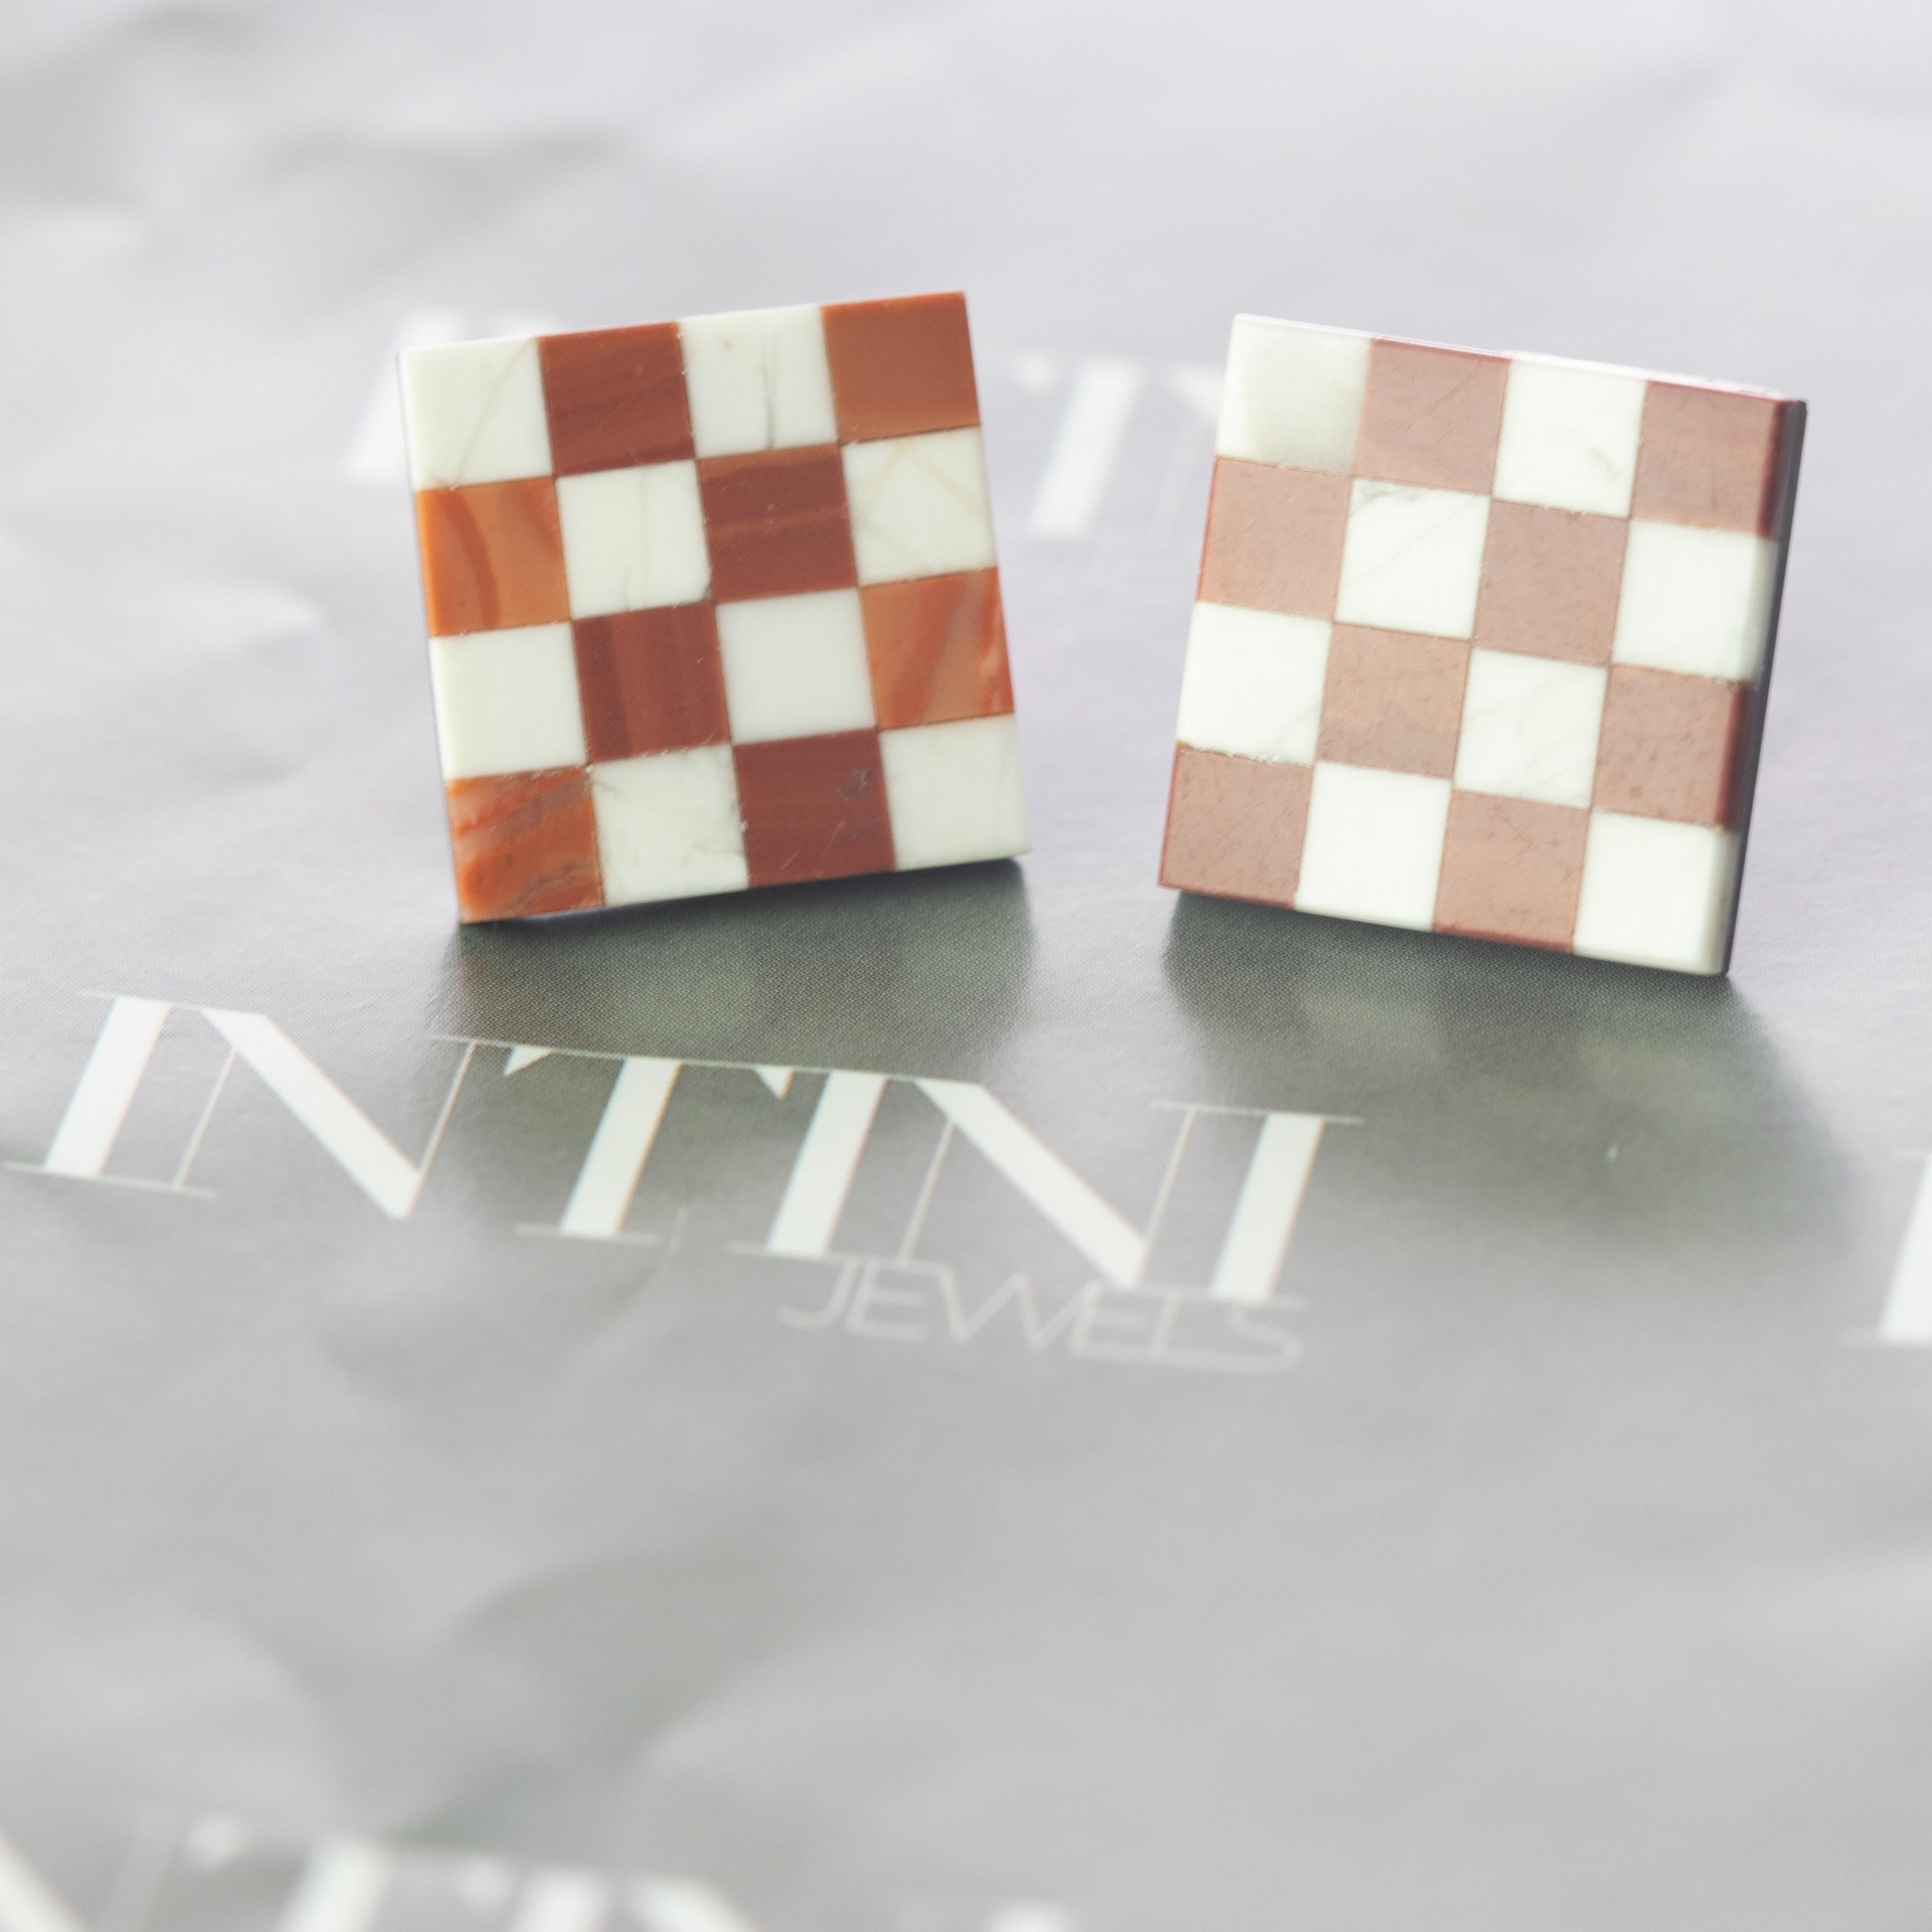 Astonishing and gorgeous jasper stud earrings. Carved and colored in white and brown squares which evokes a traditional chess board the italian handmade jewelry work.

Jasper is a stress relieving stone; relaxing, soothing and calming to the